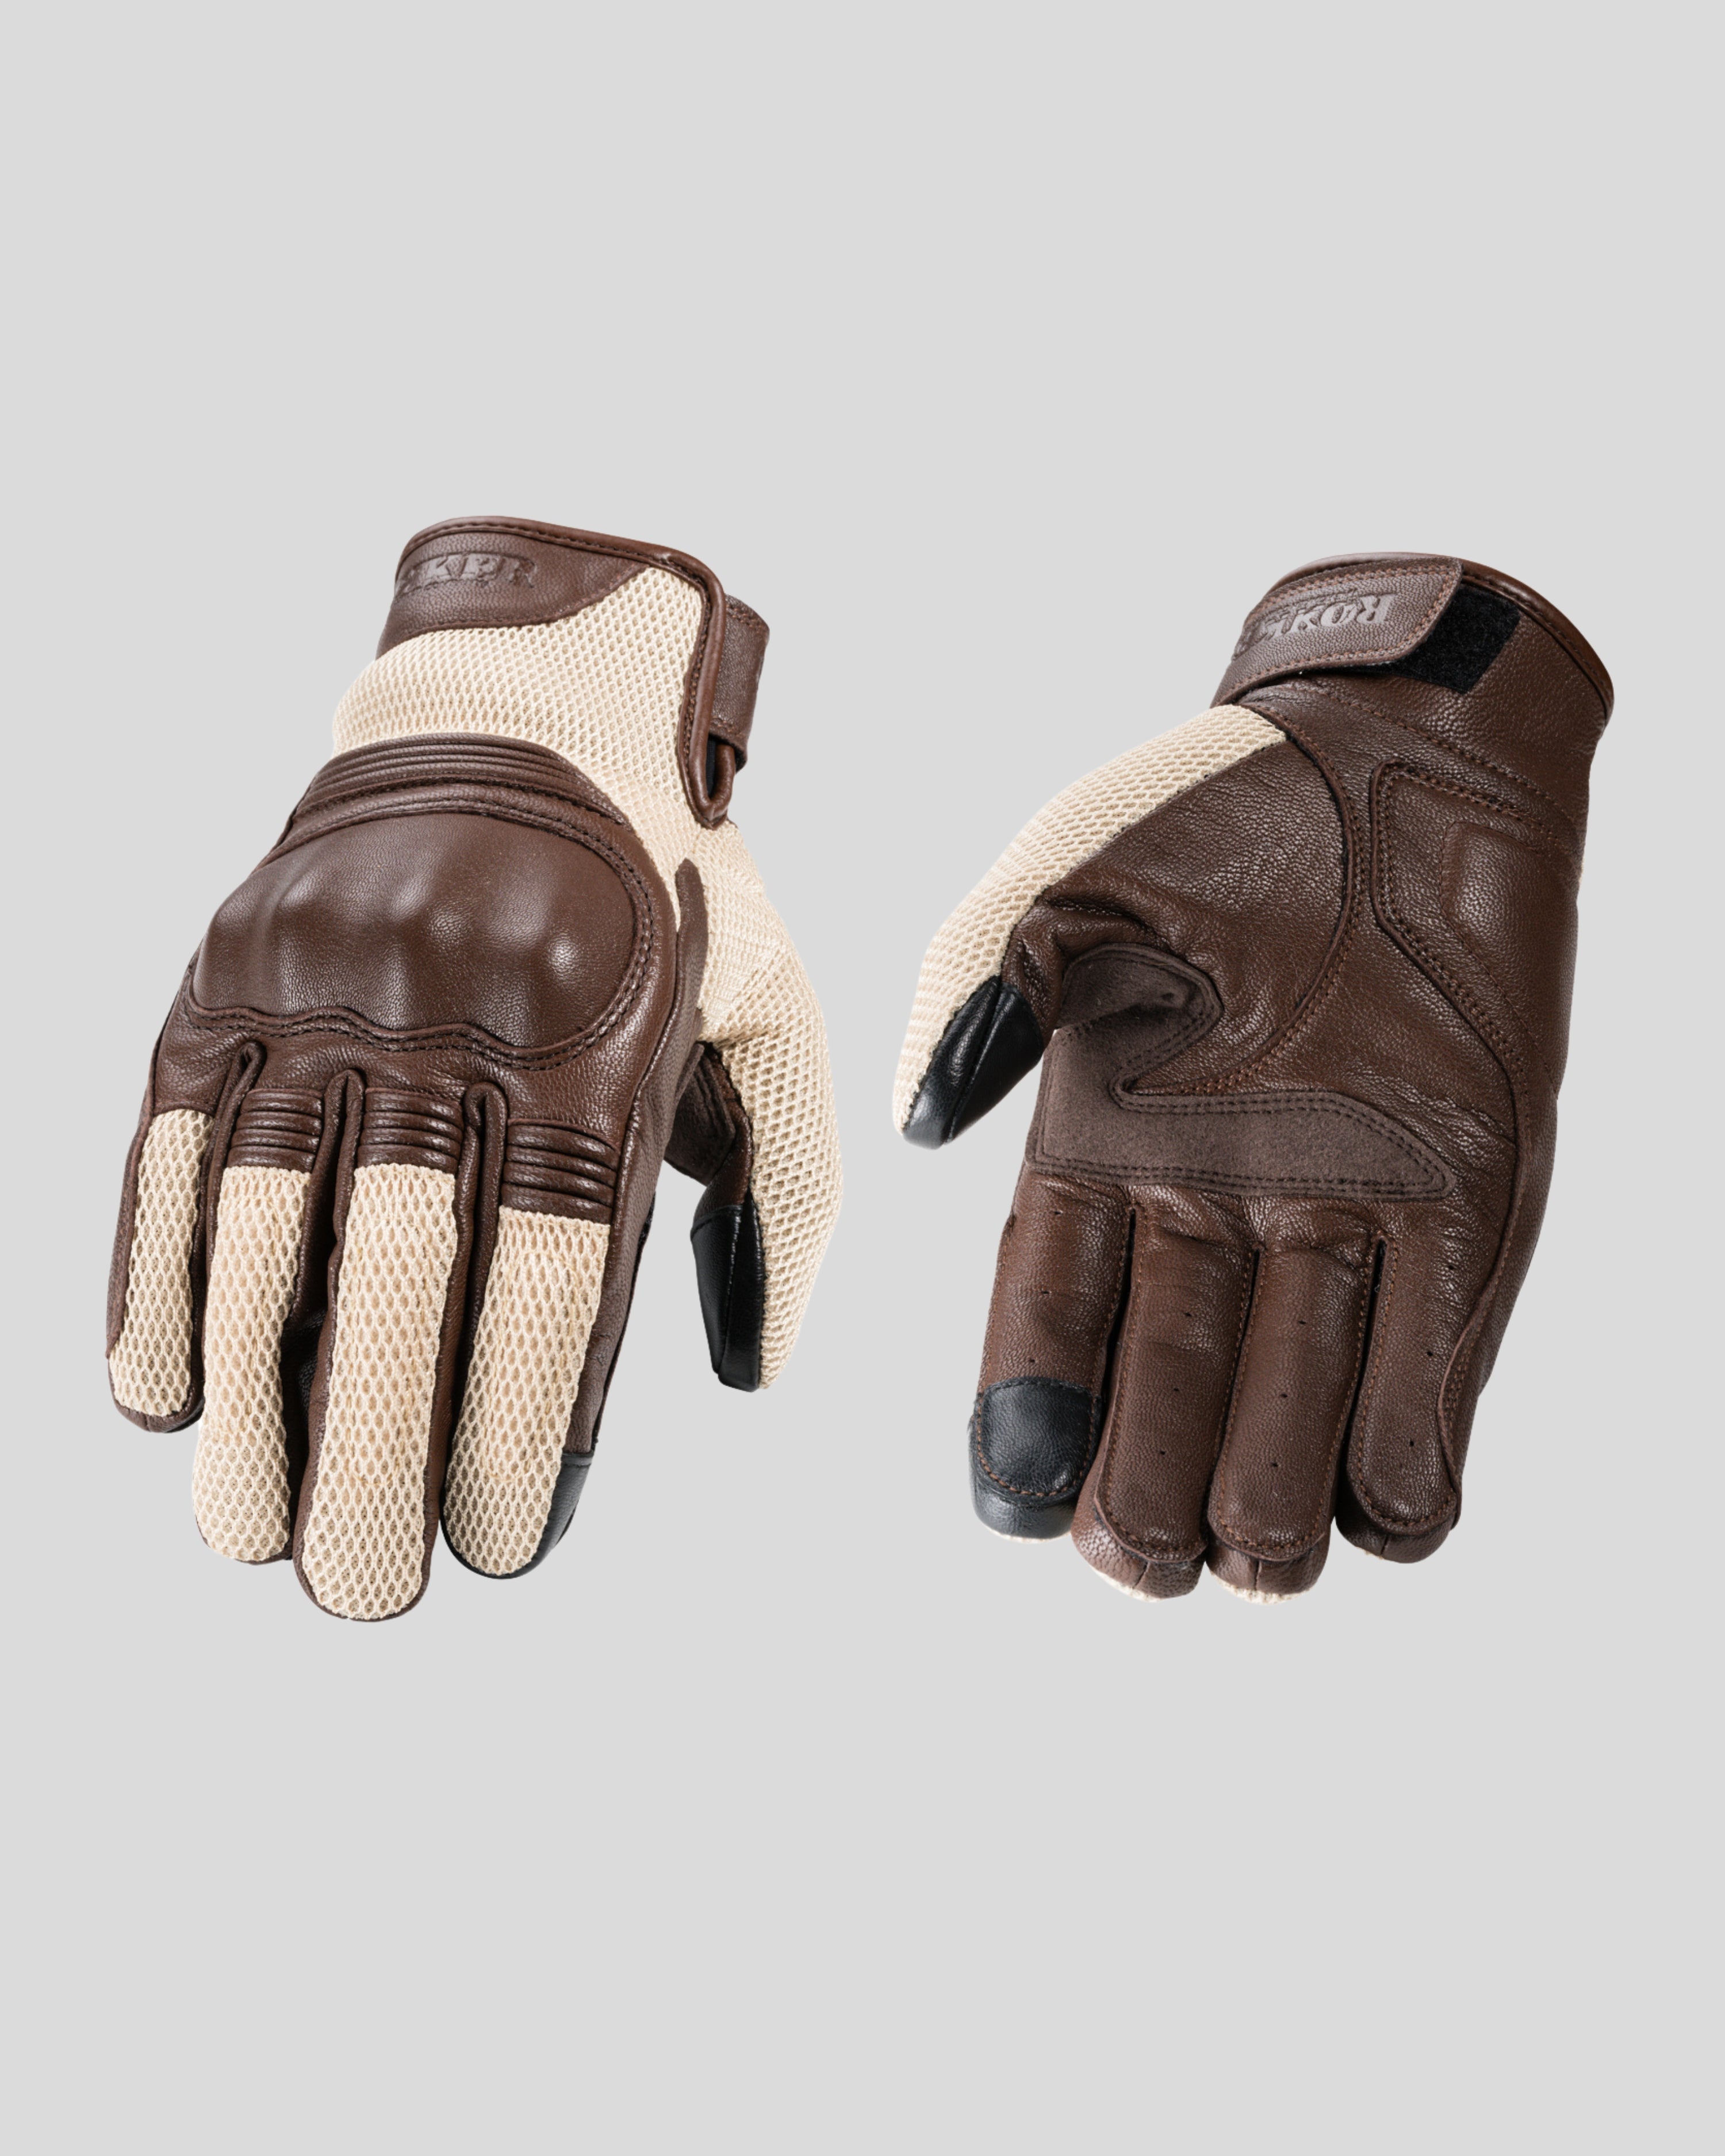 Motorcycle gloves by ROKKER - the best grip for your rides